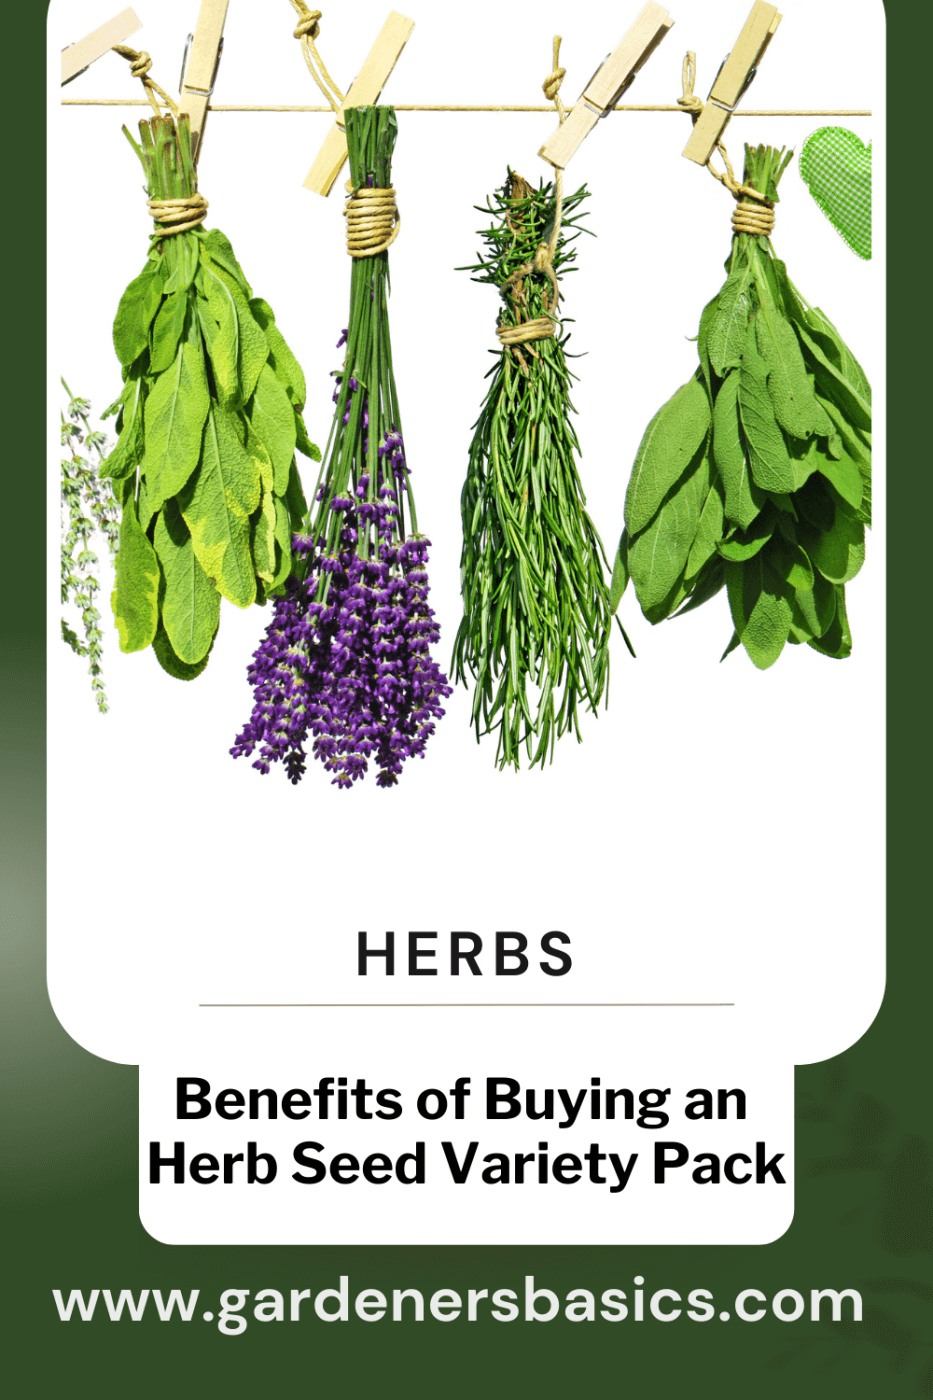 Benefits of Buying an Herb Seed Variety Pack